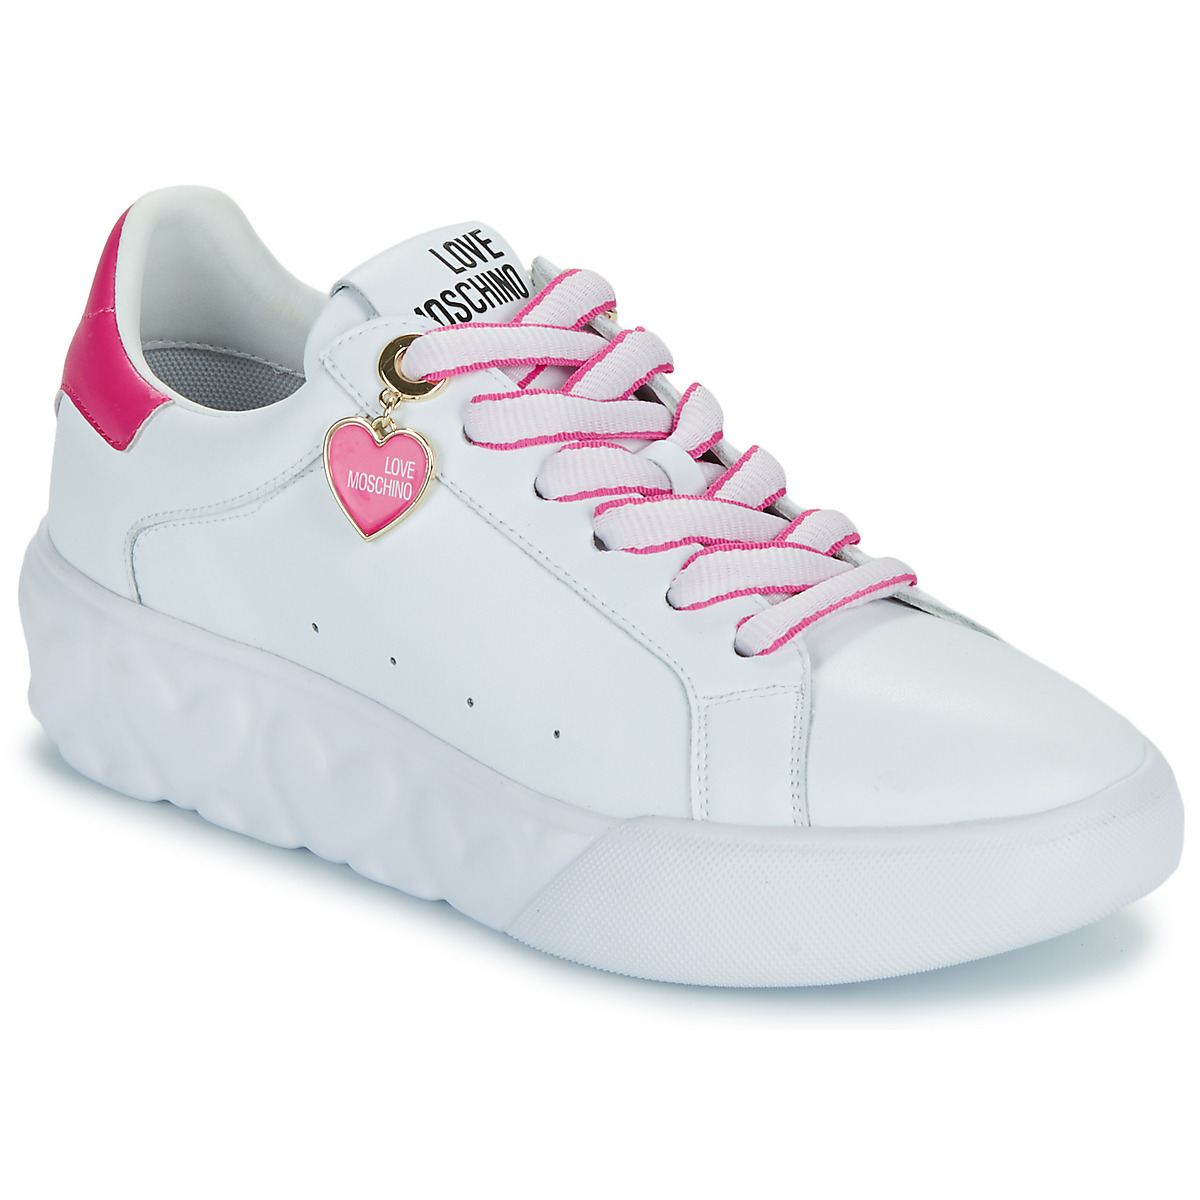 Xαμηλά Sneakers Love Moschino FUXIA HEART+GOLD